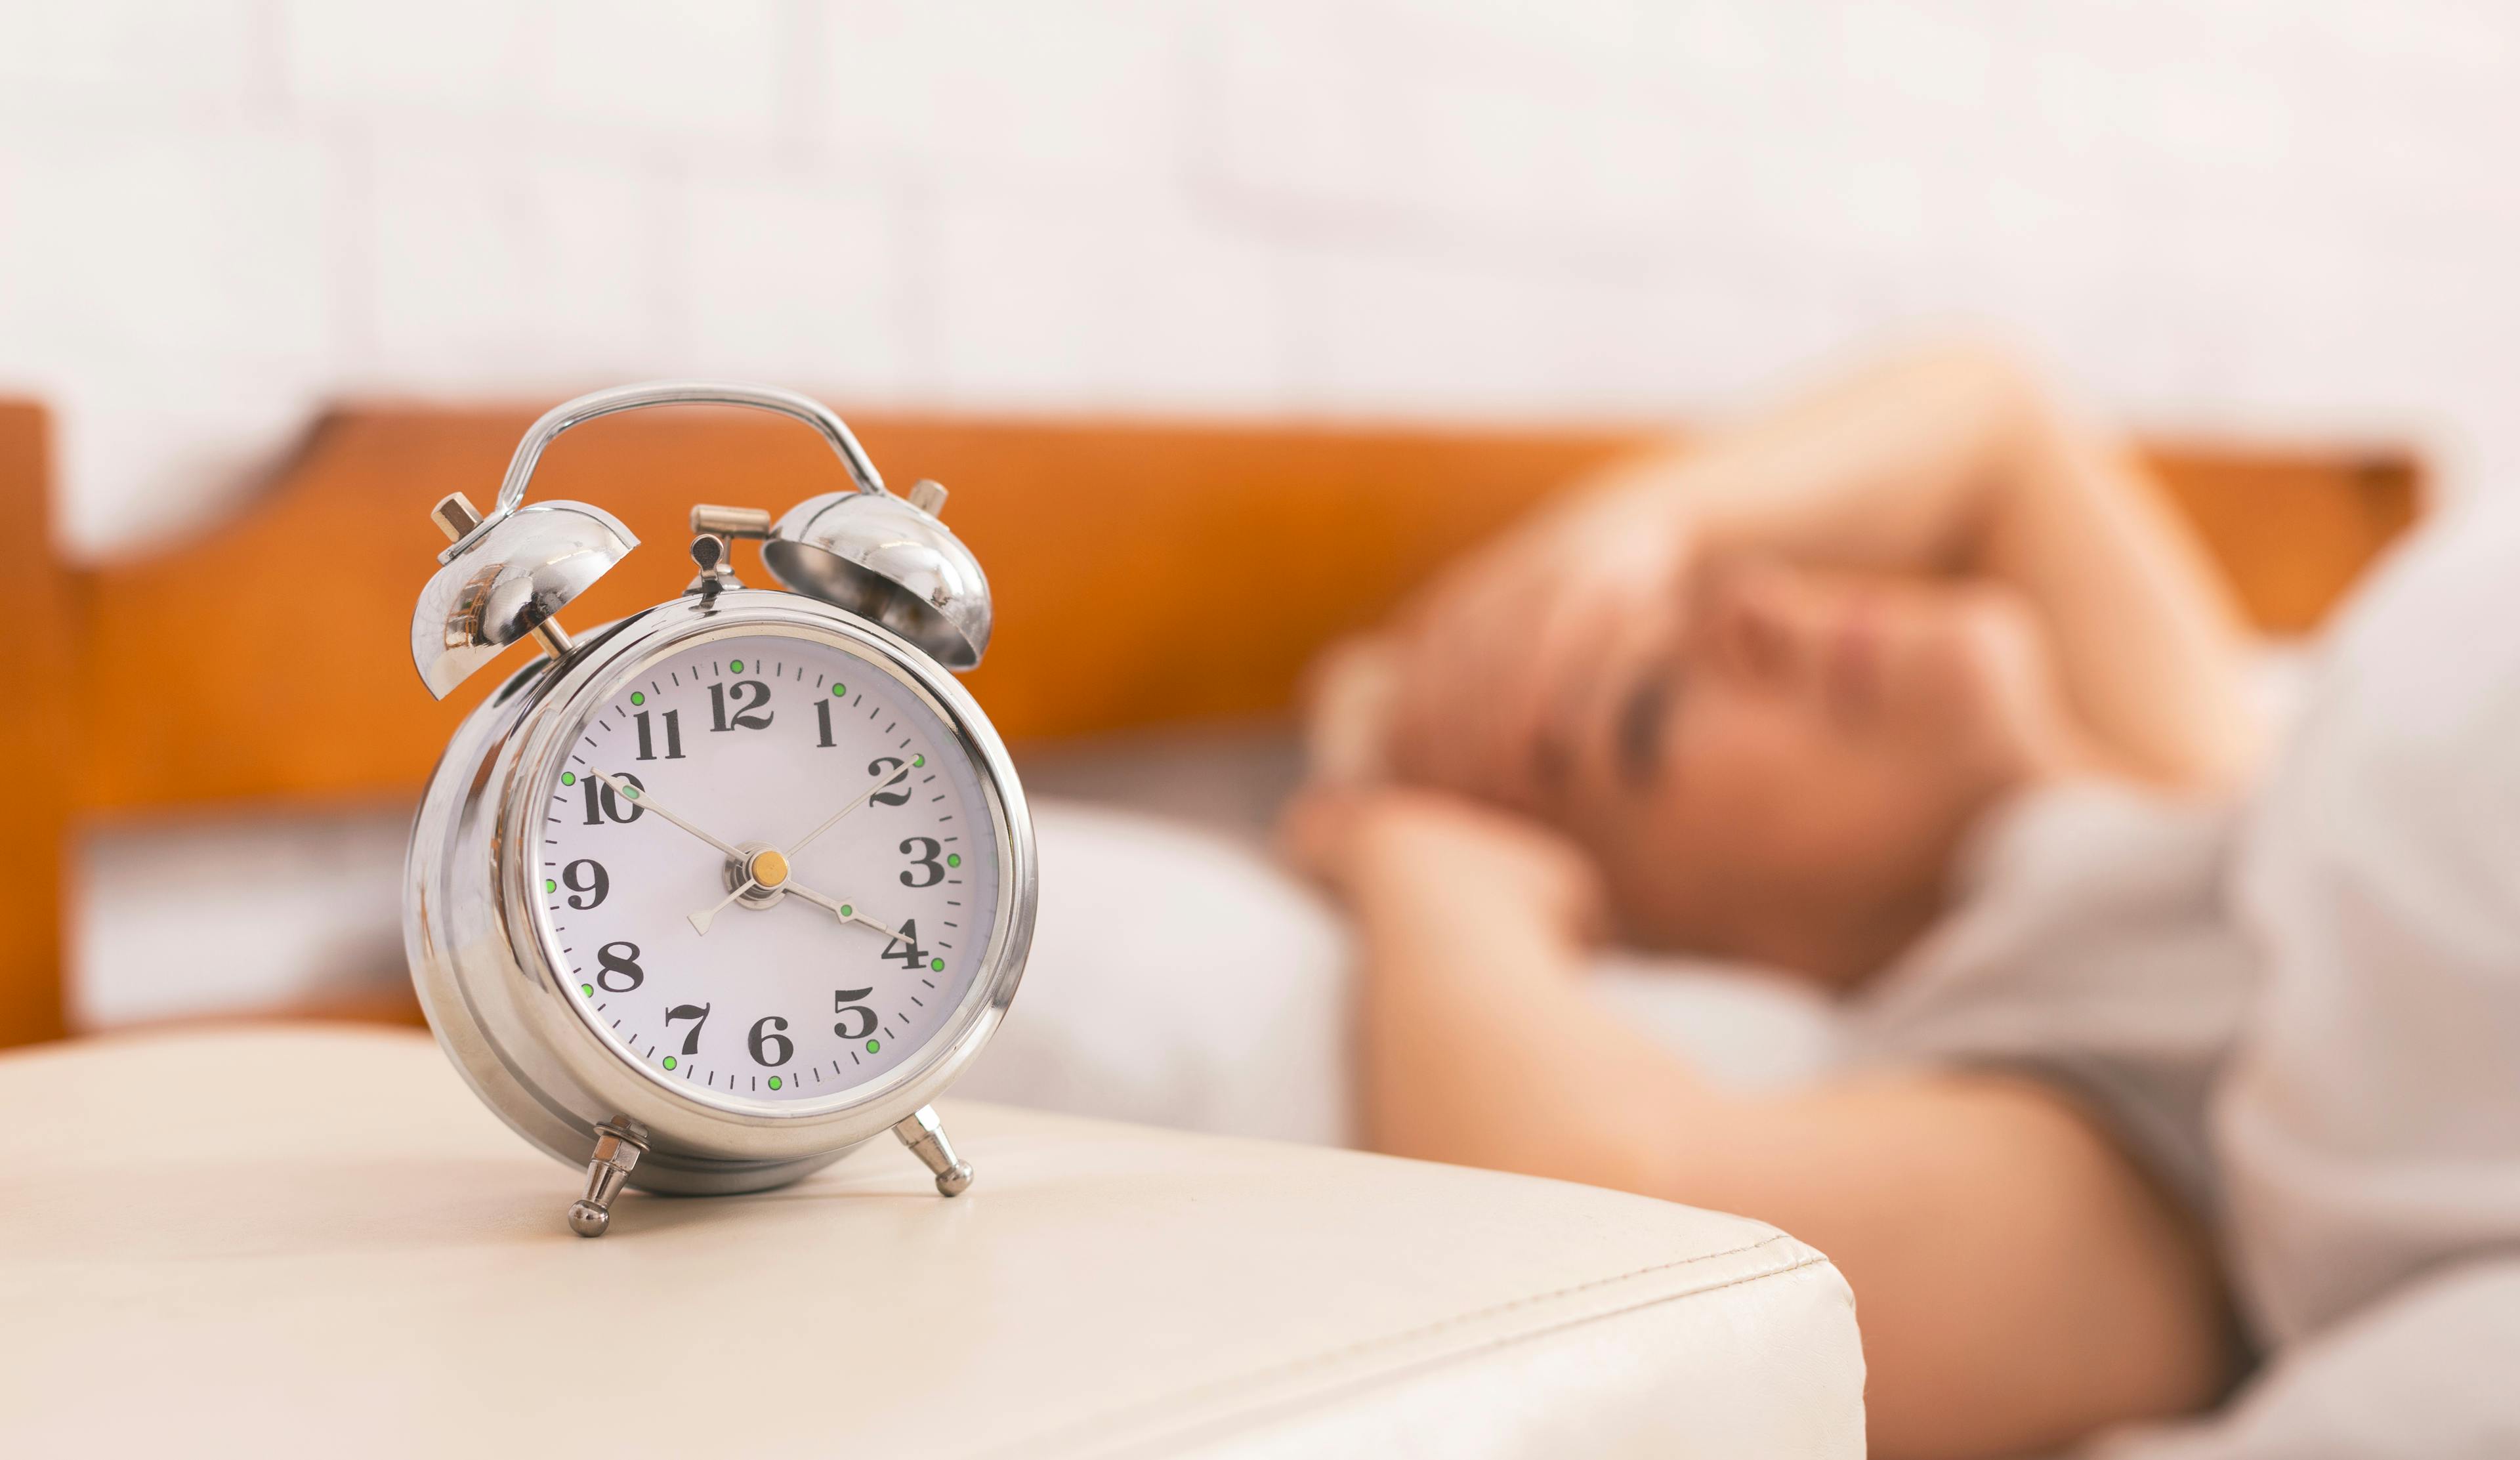 Hitting the snooze button too often is bad for sleep